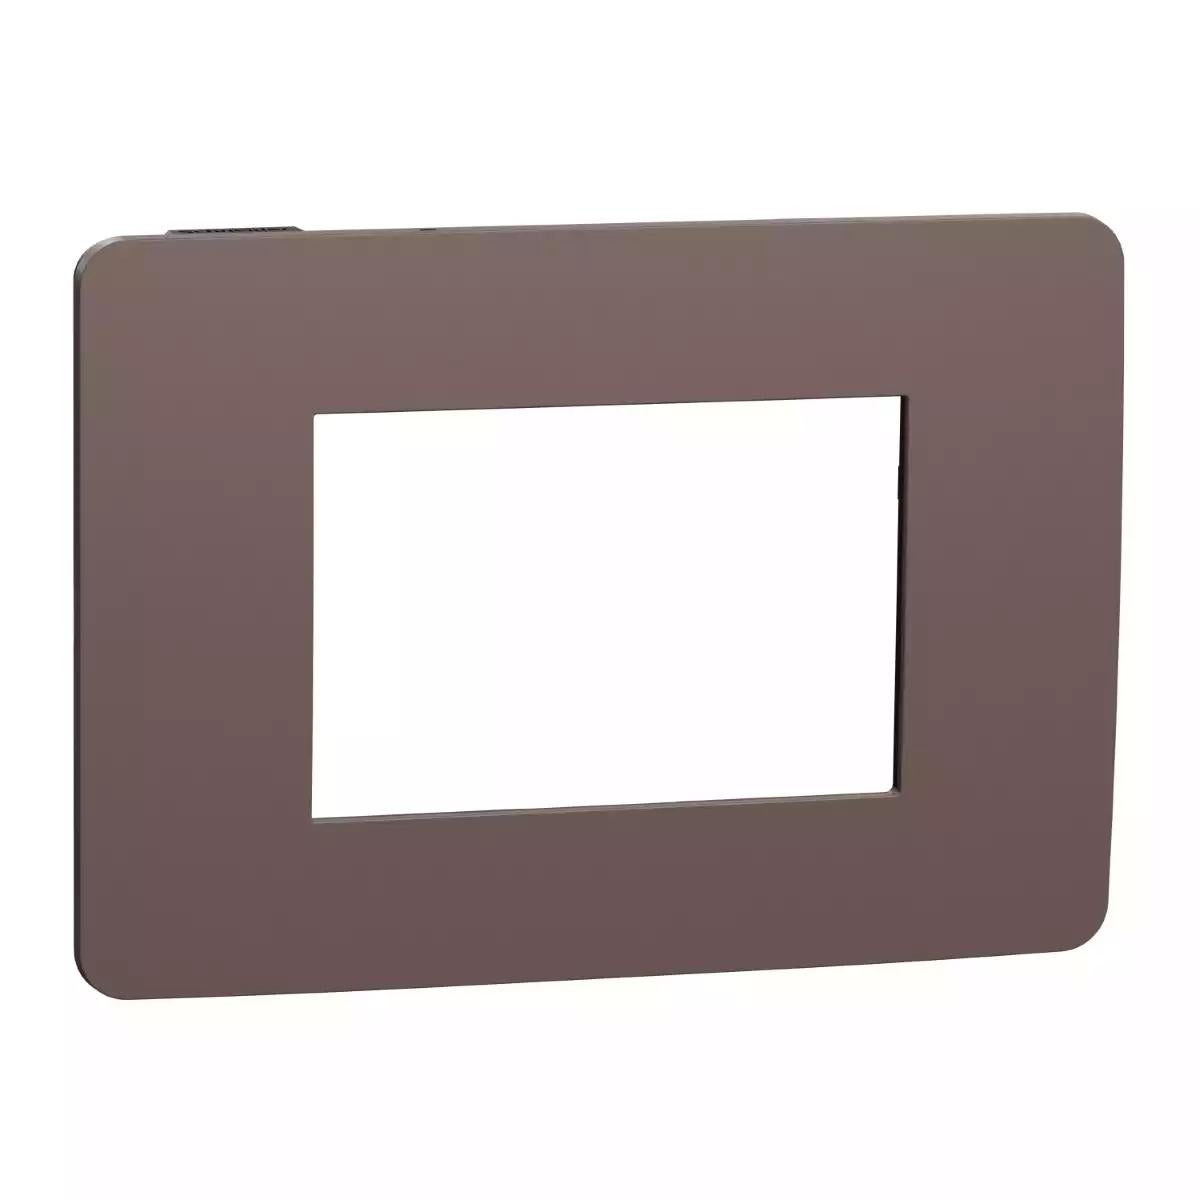 Cover frame, New Unica, 3 modules, chocolate or black